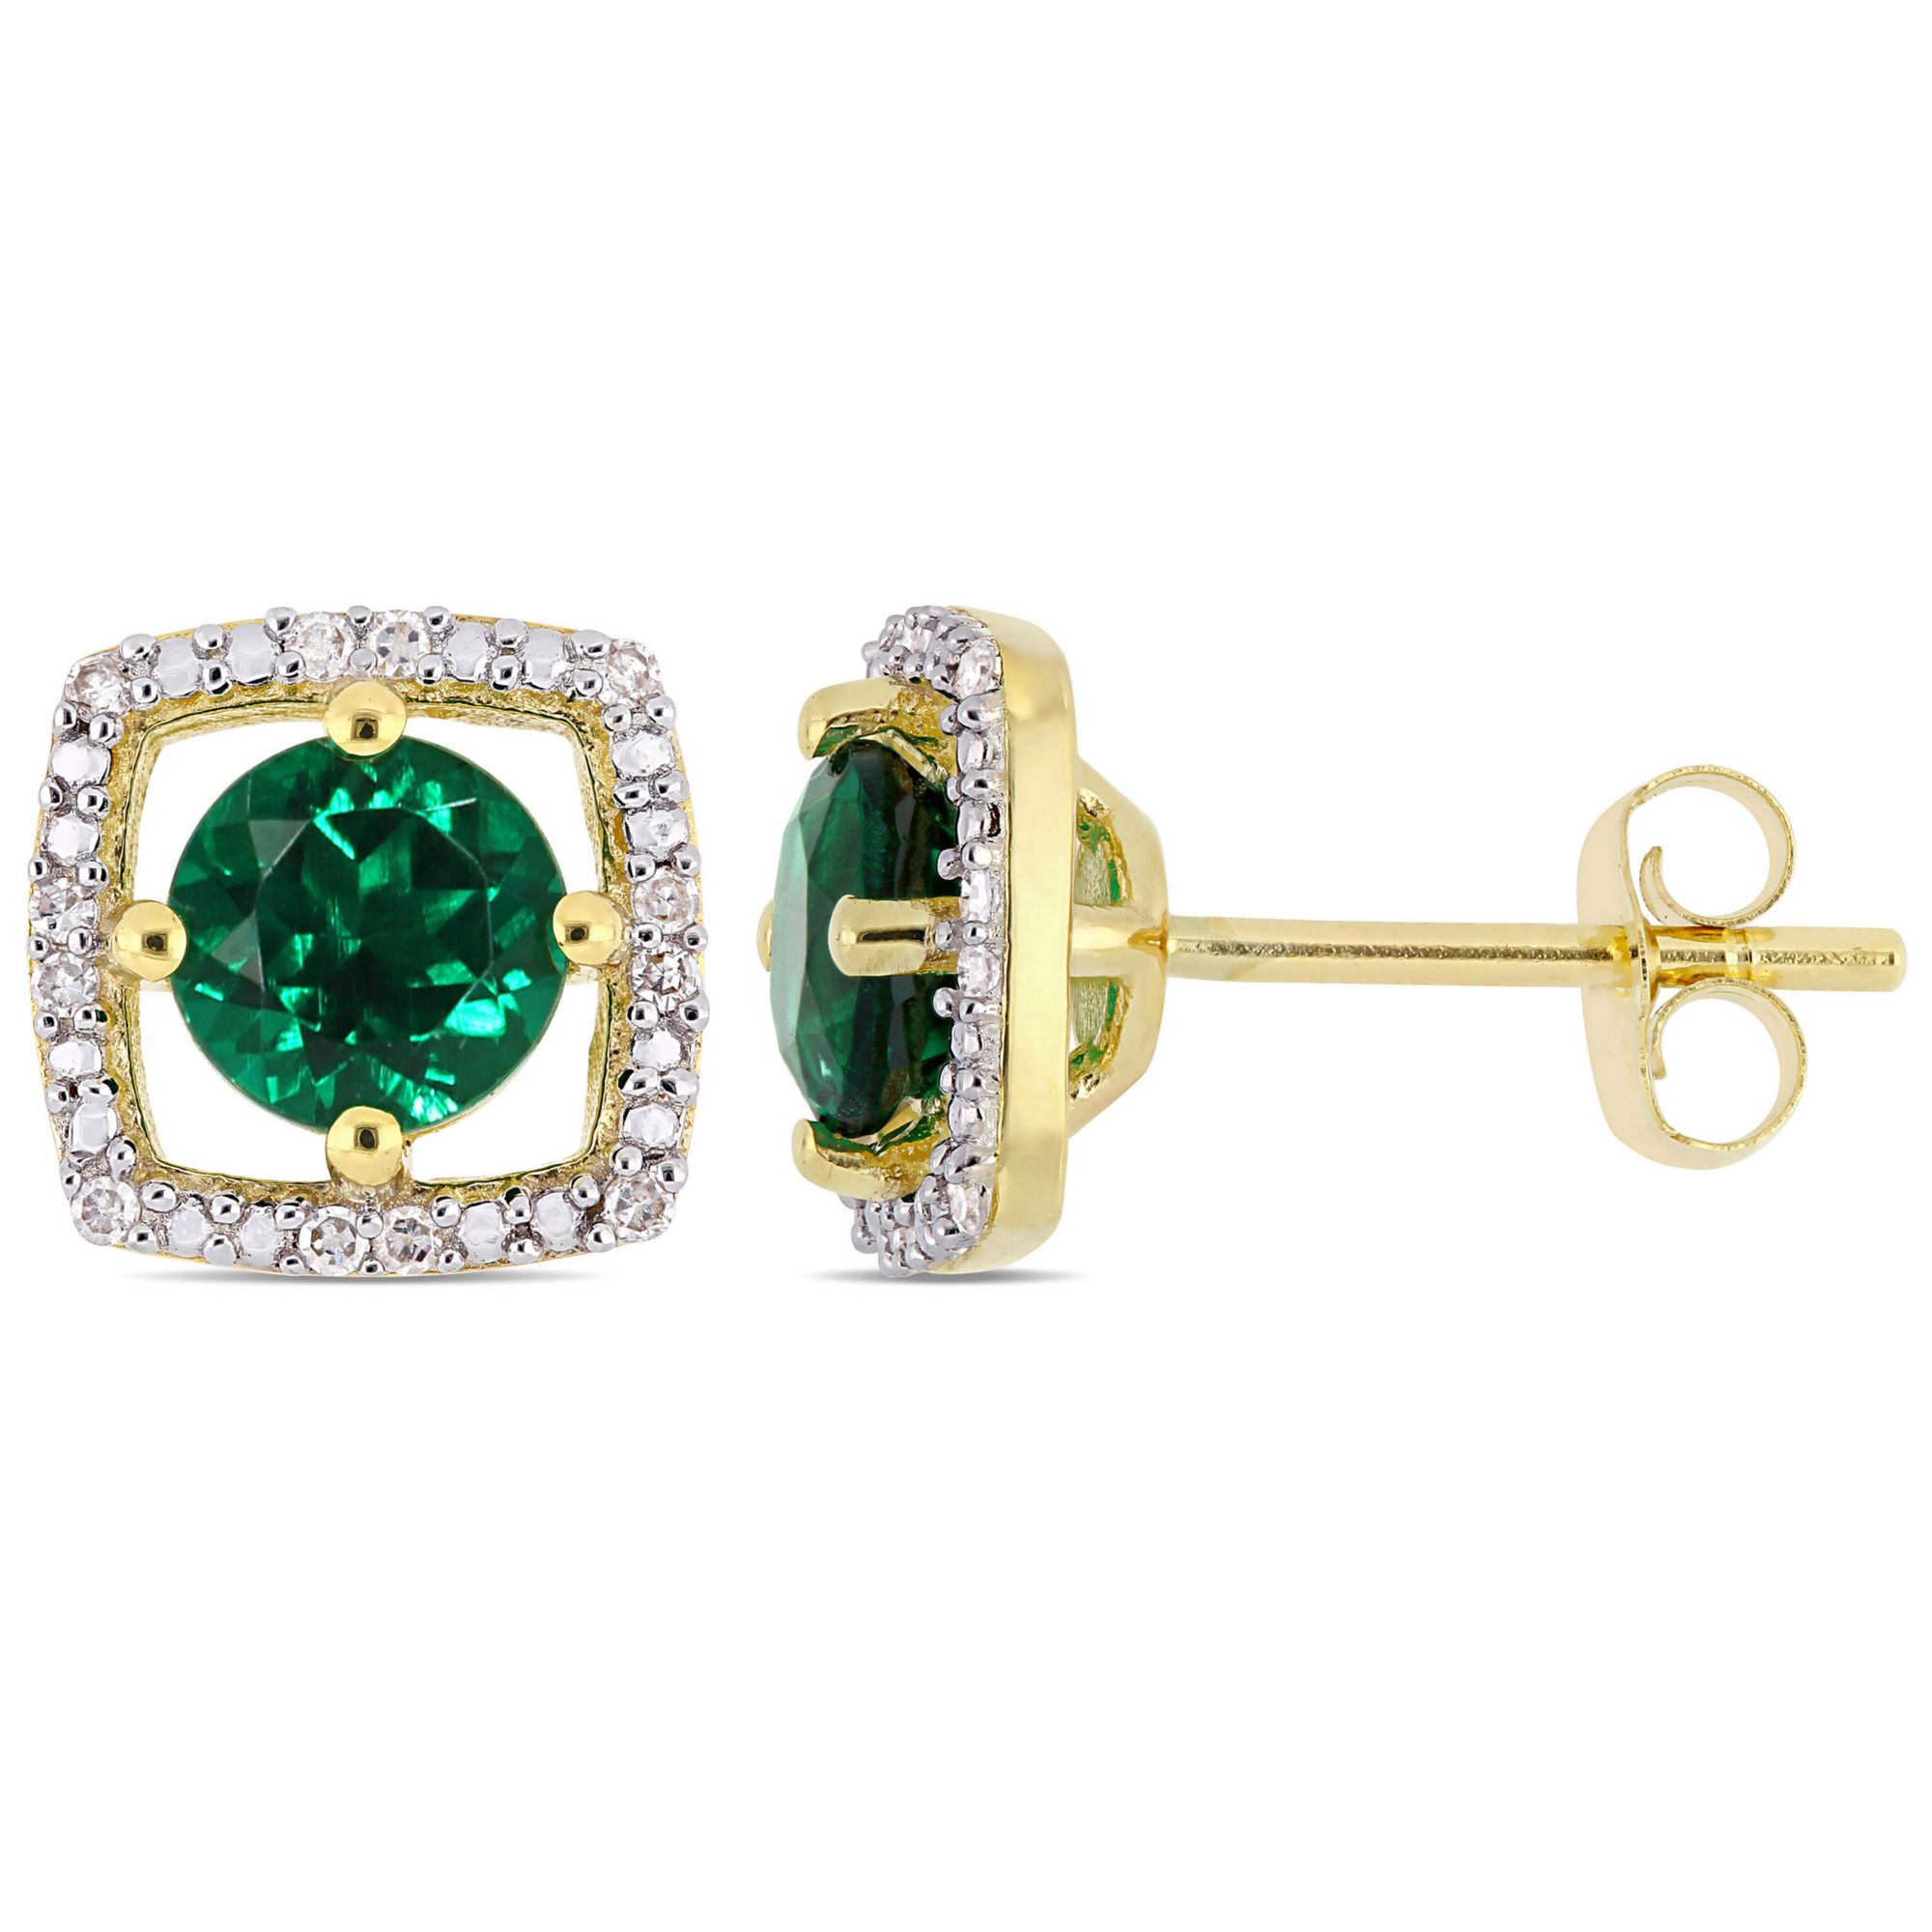 1 ct. t.w. Emerald and Diamond Accent Stud Earrings in 10k Yellow Gold